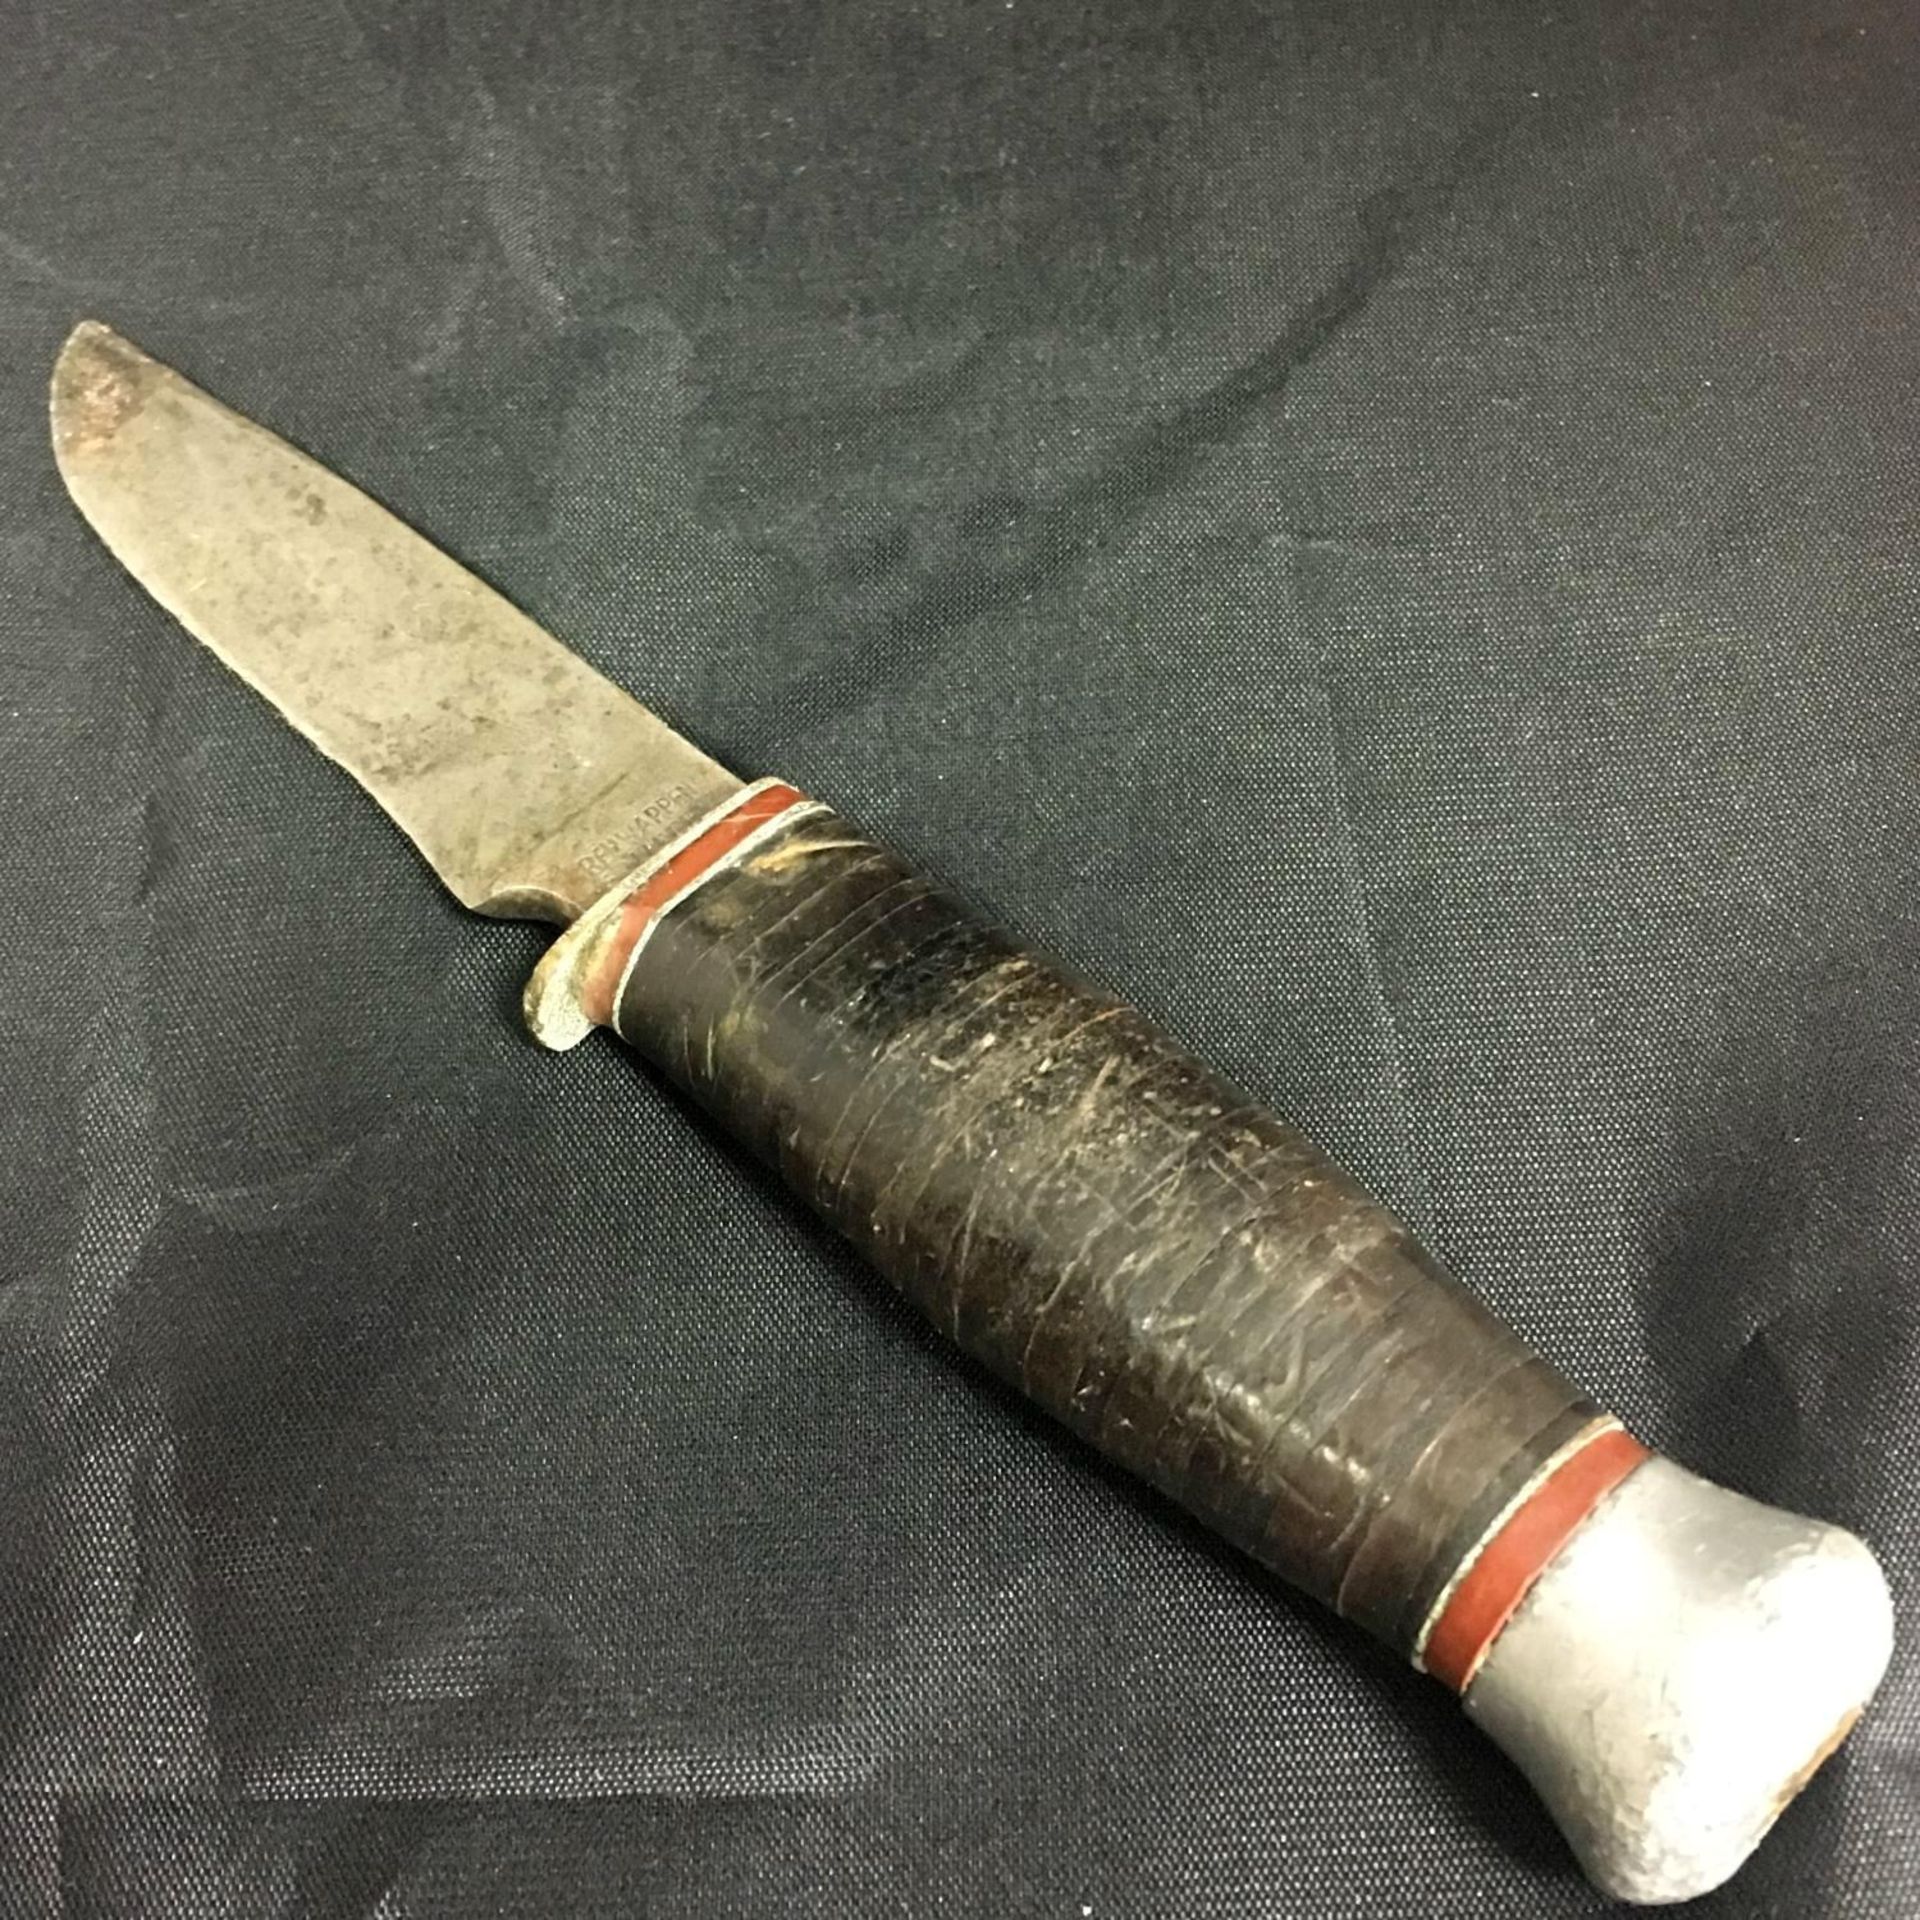 VINTAGE GERMAN HUNTING KNIFE. Made by Rehwappen - Solingen. Scarce and highly collectable item.